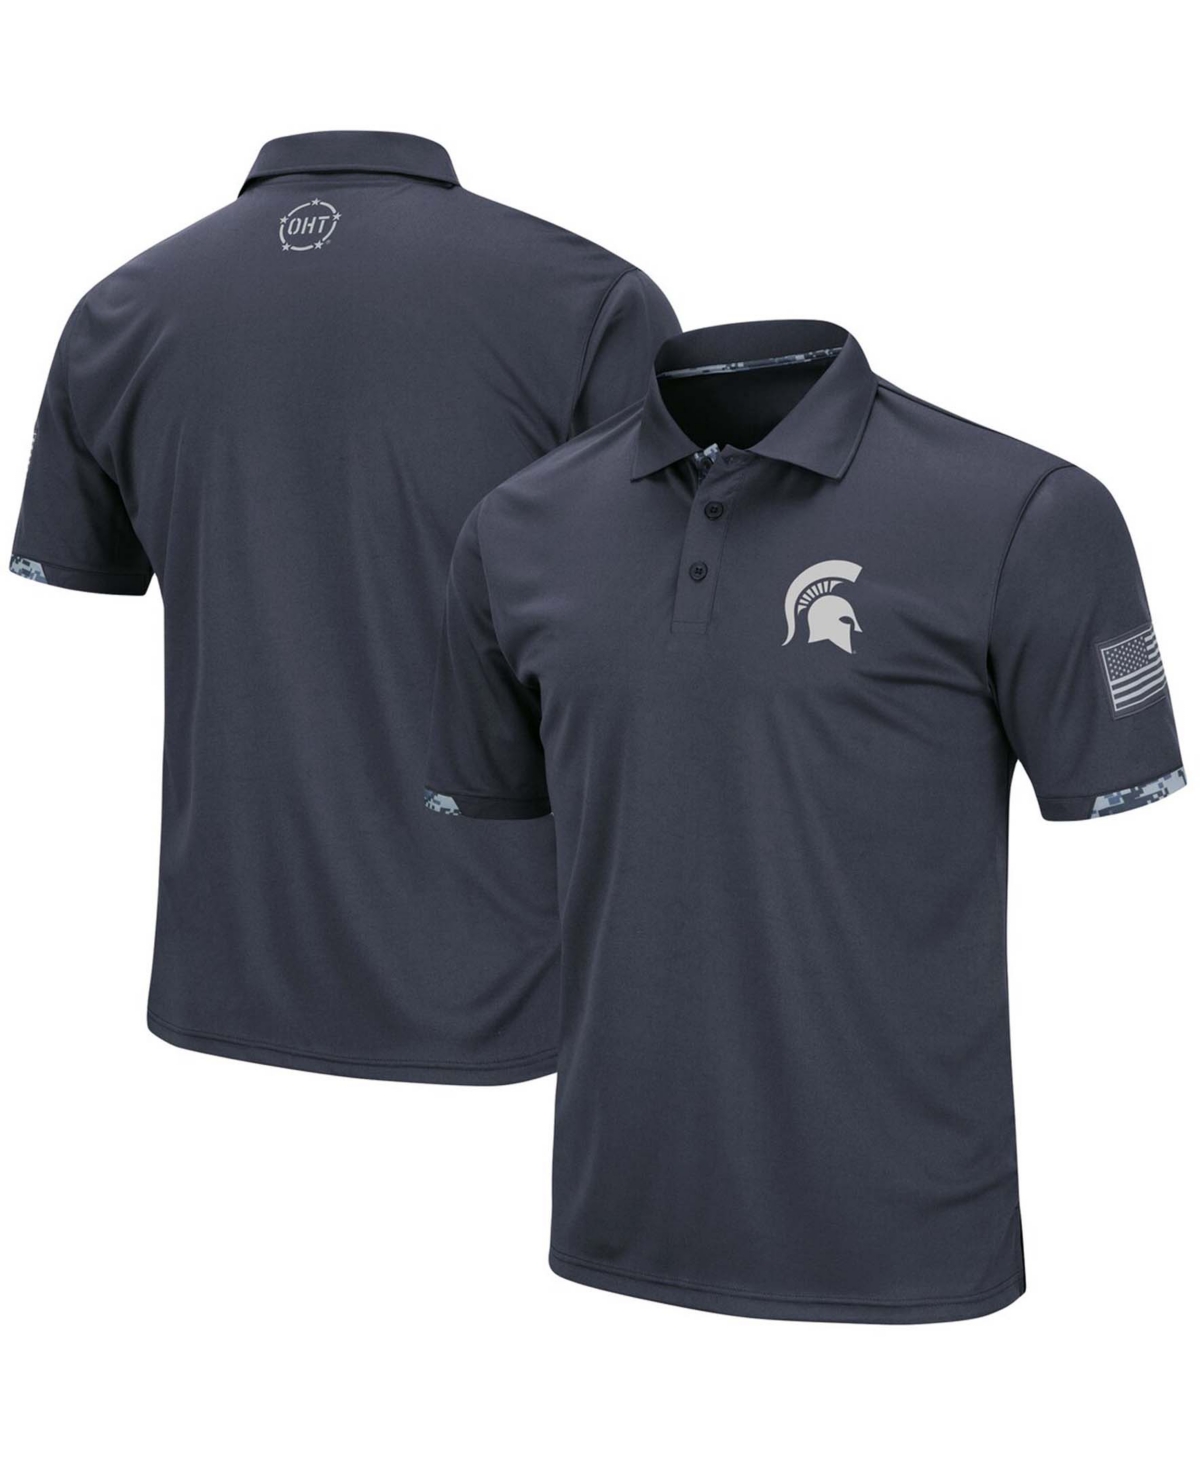 Men's Charcoal Michigan State Spartans Oht Military-Inspired Appreciation Digital Camo Polo Shirt - Charcoal